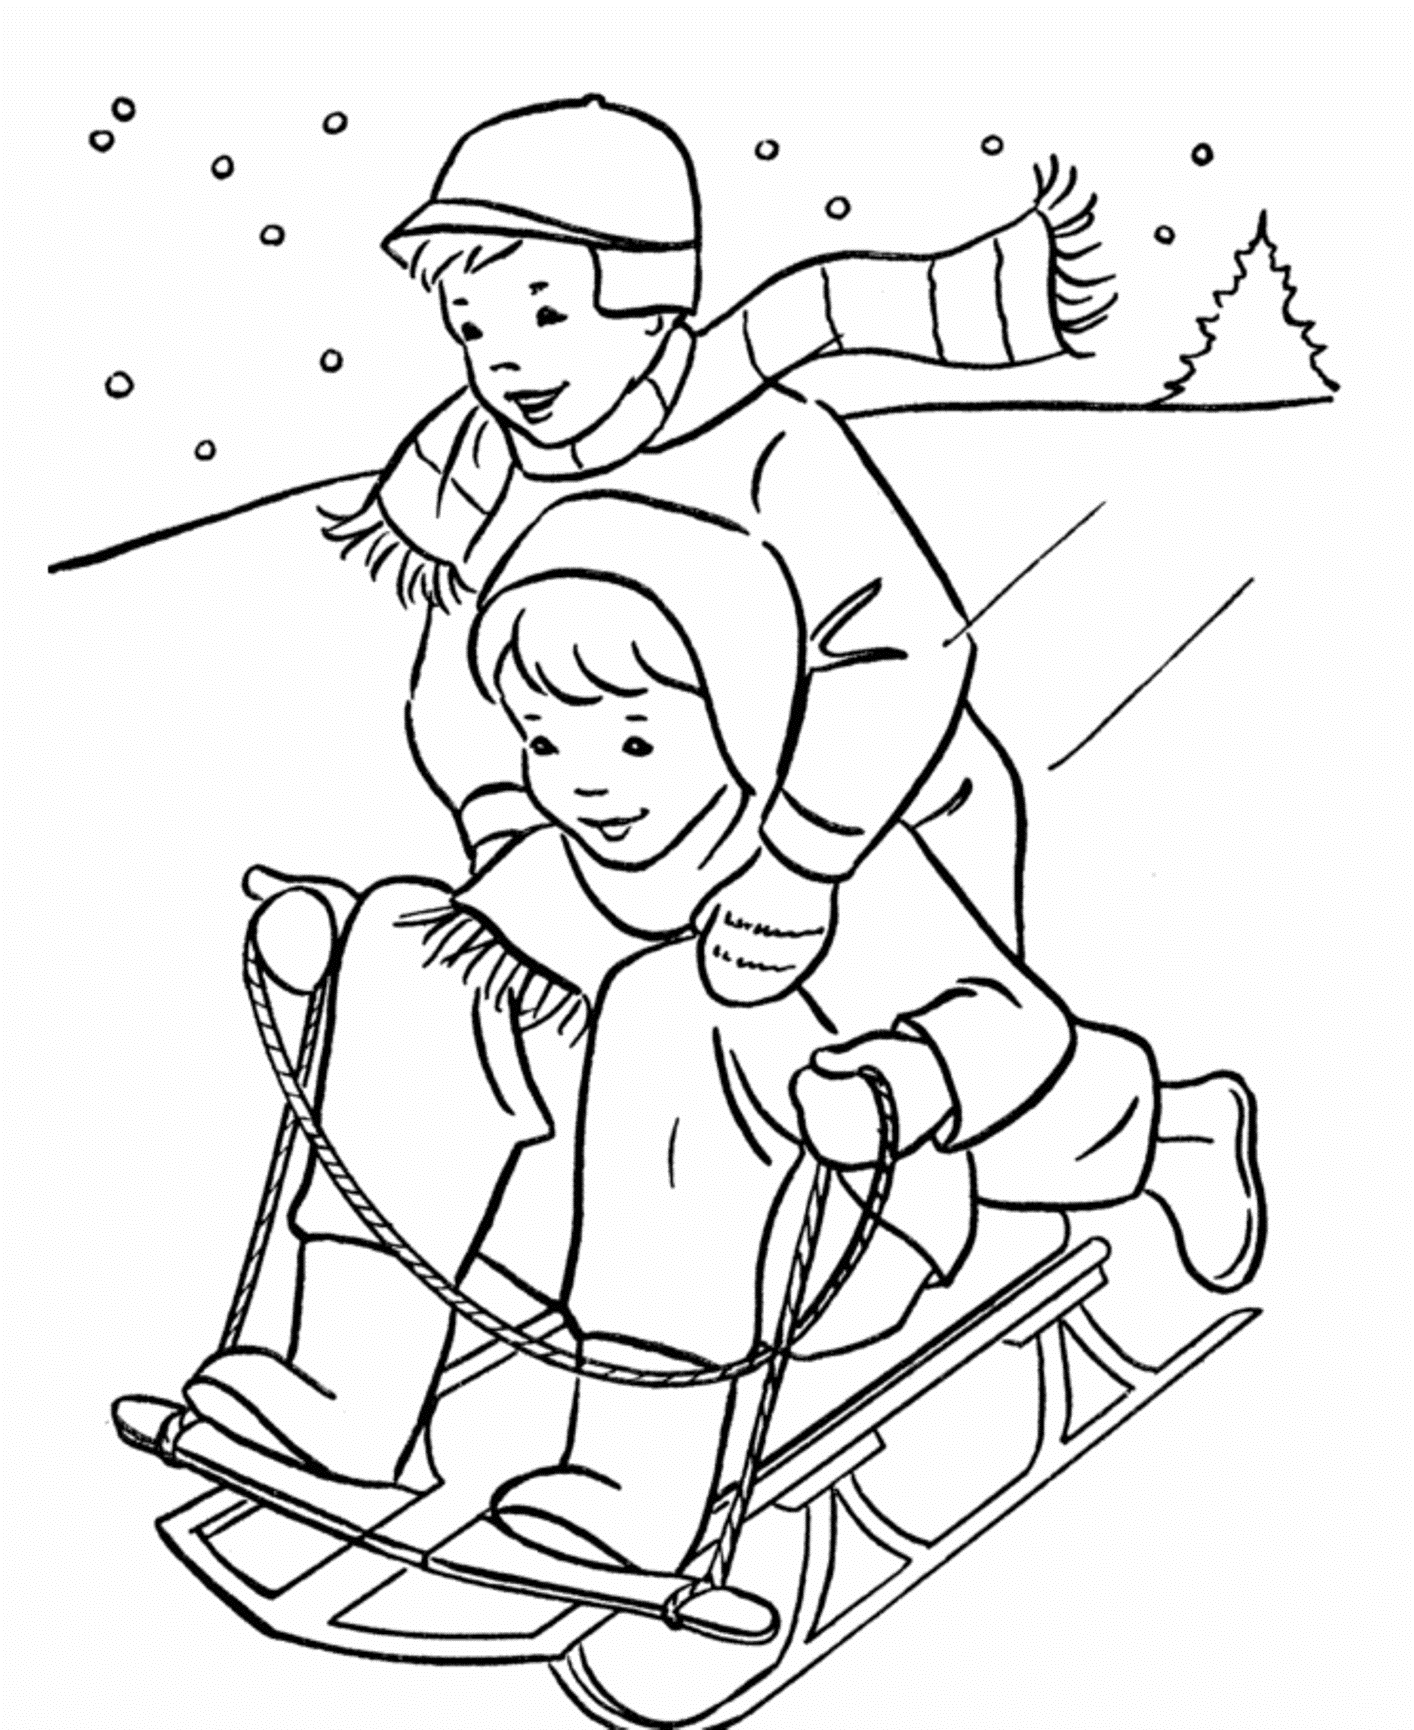 ilovemy-gfs-free-printable-winter-coloring-pages